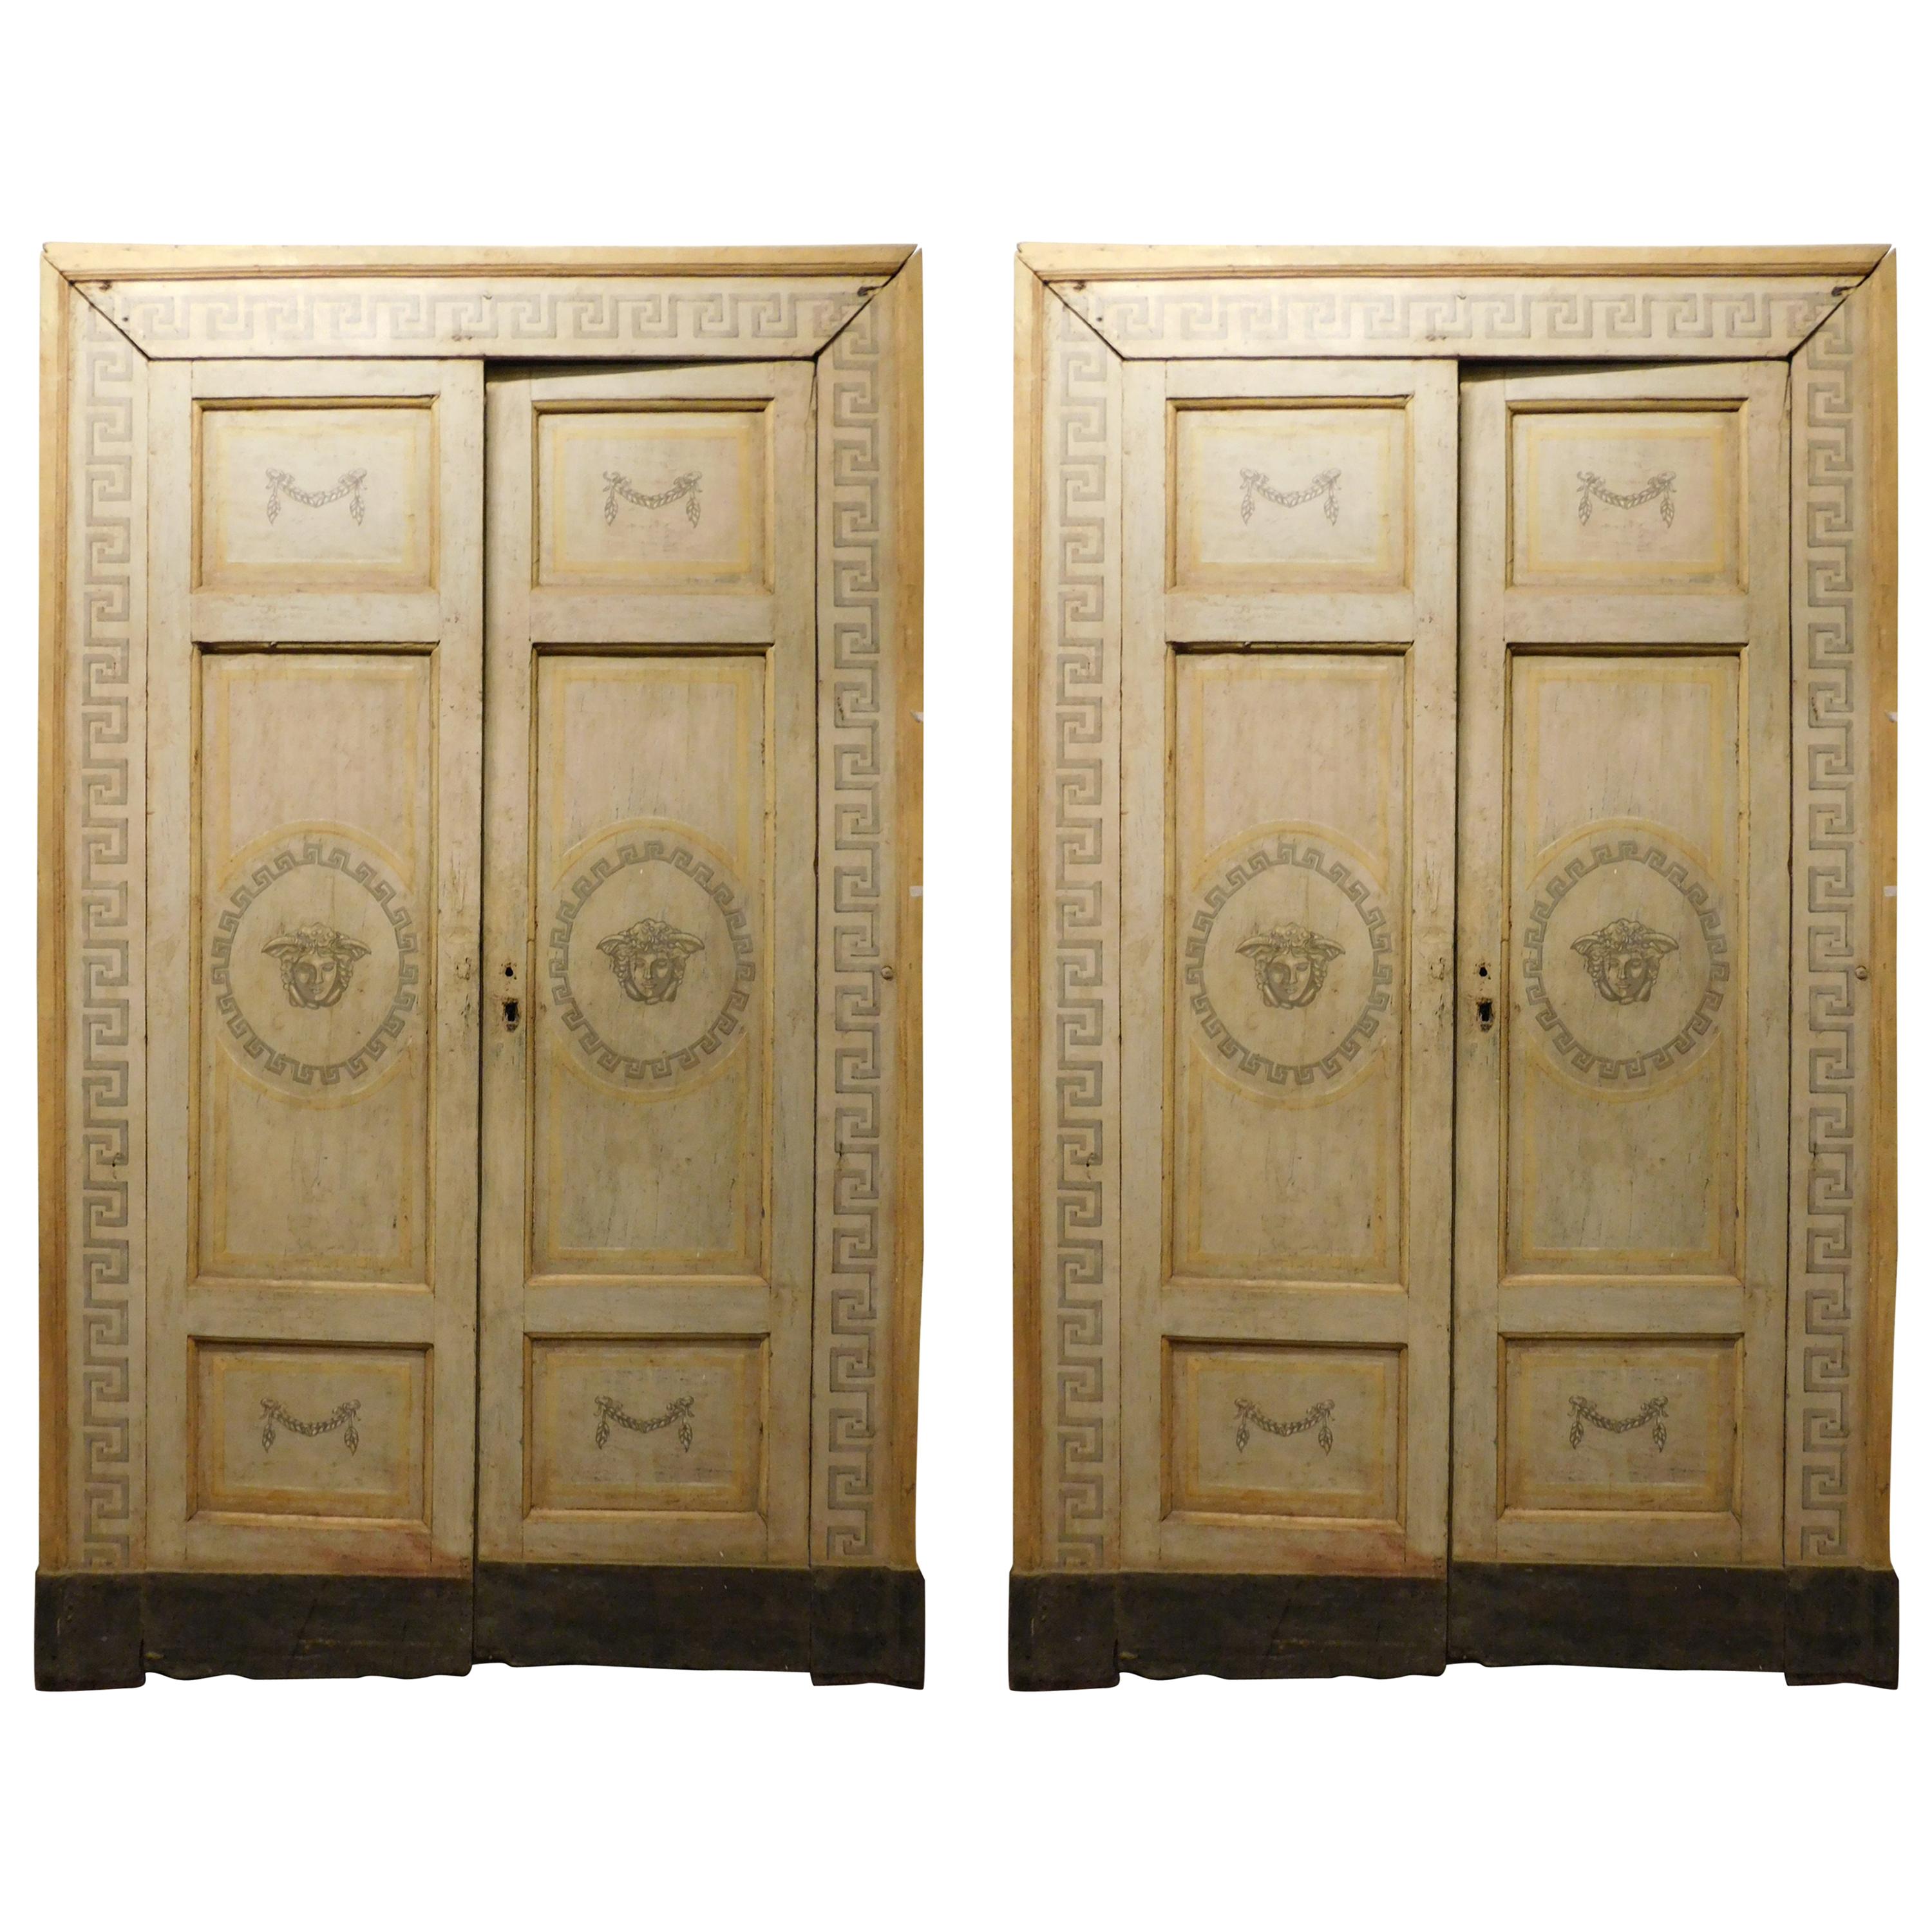 Pair of Antique Lacquered Double Doors with Frame, Medusa, 18th Century Italy For Sale